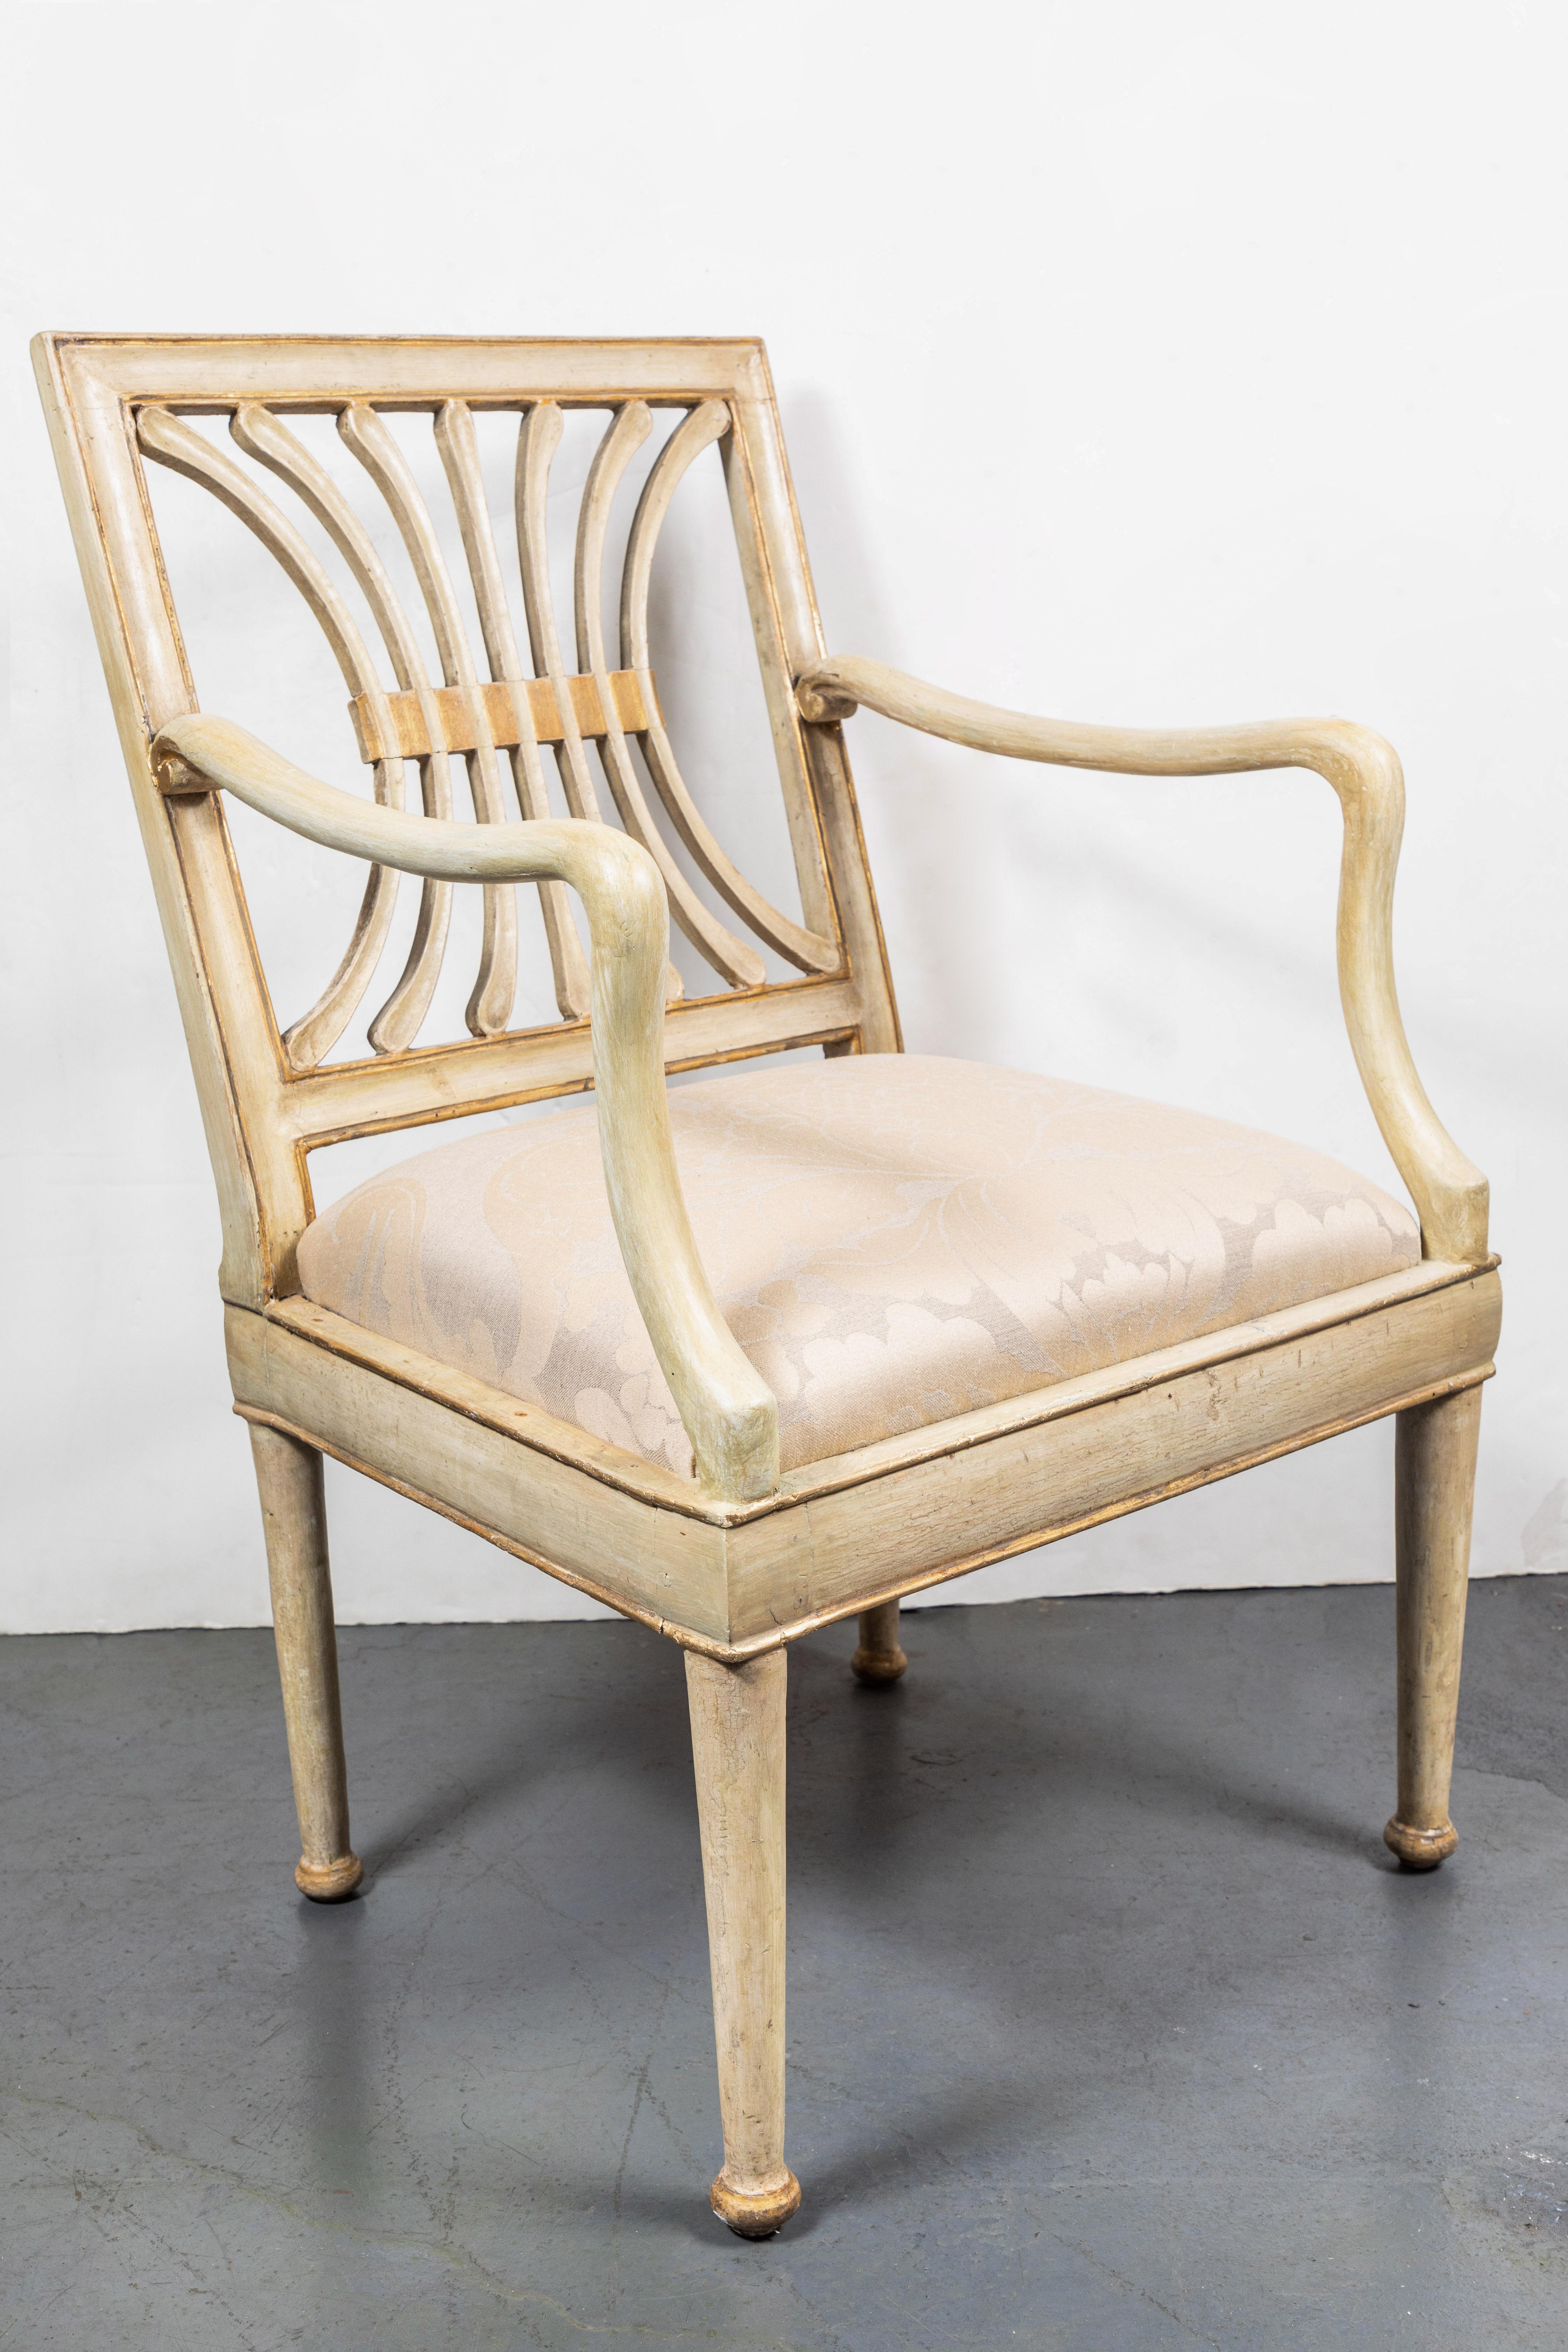 Six, hand carved, painted, and parcel gilt, turn-of-the-century Italian chairs in creme. The pierced, sculptural backsplat and serpentine arms above tapered legs. Acquired from a private estate in Florence, Italy.